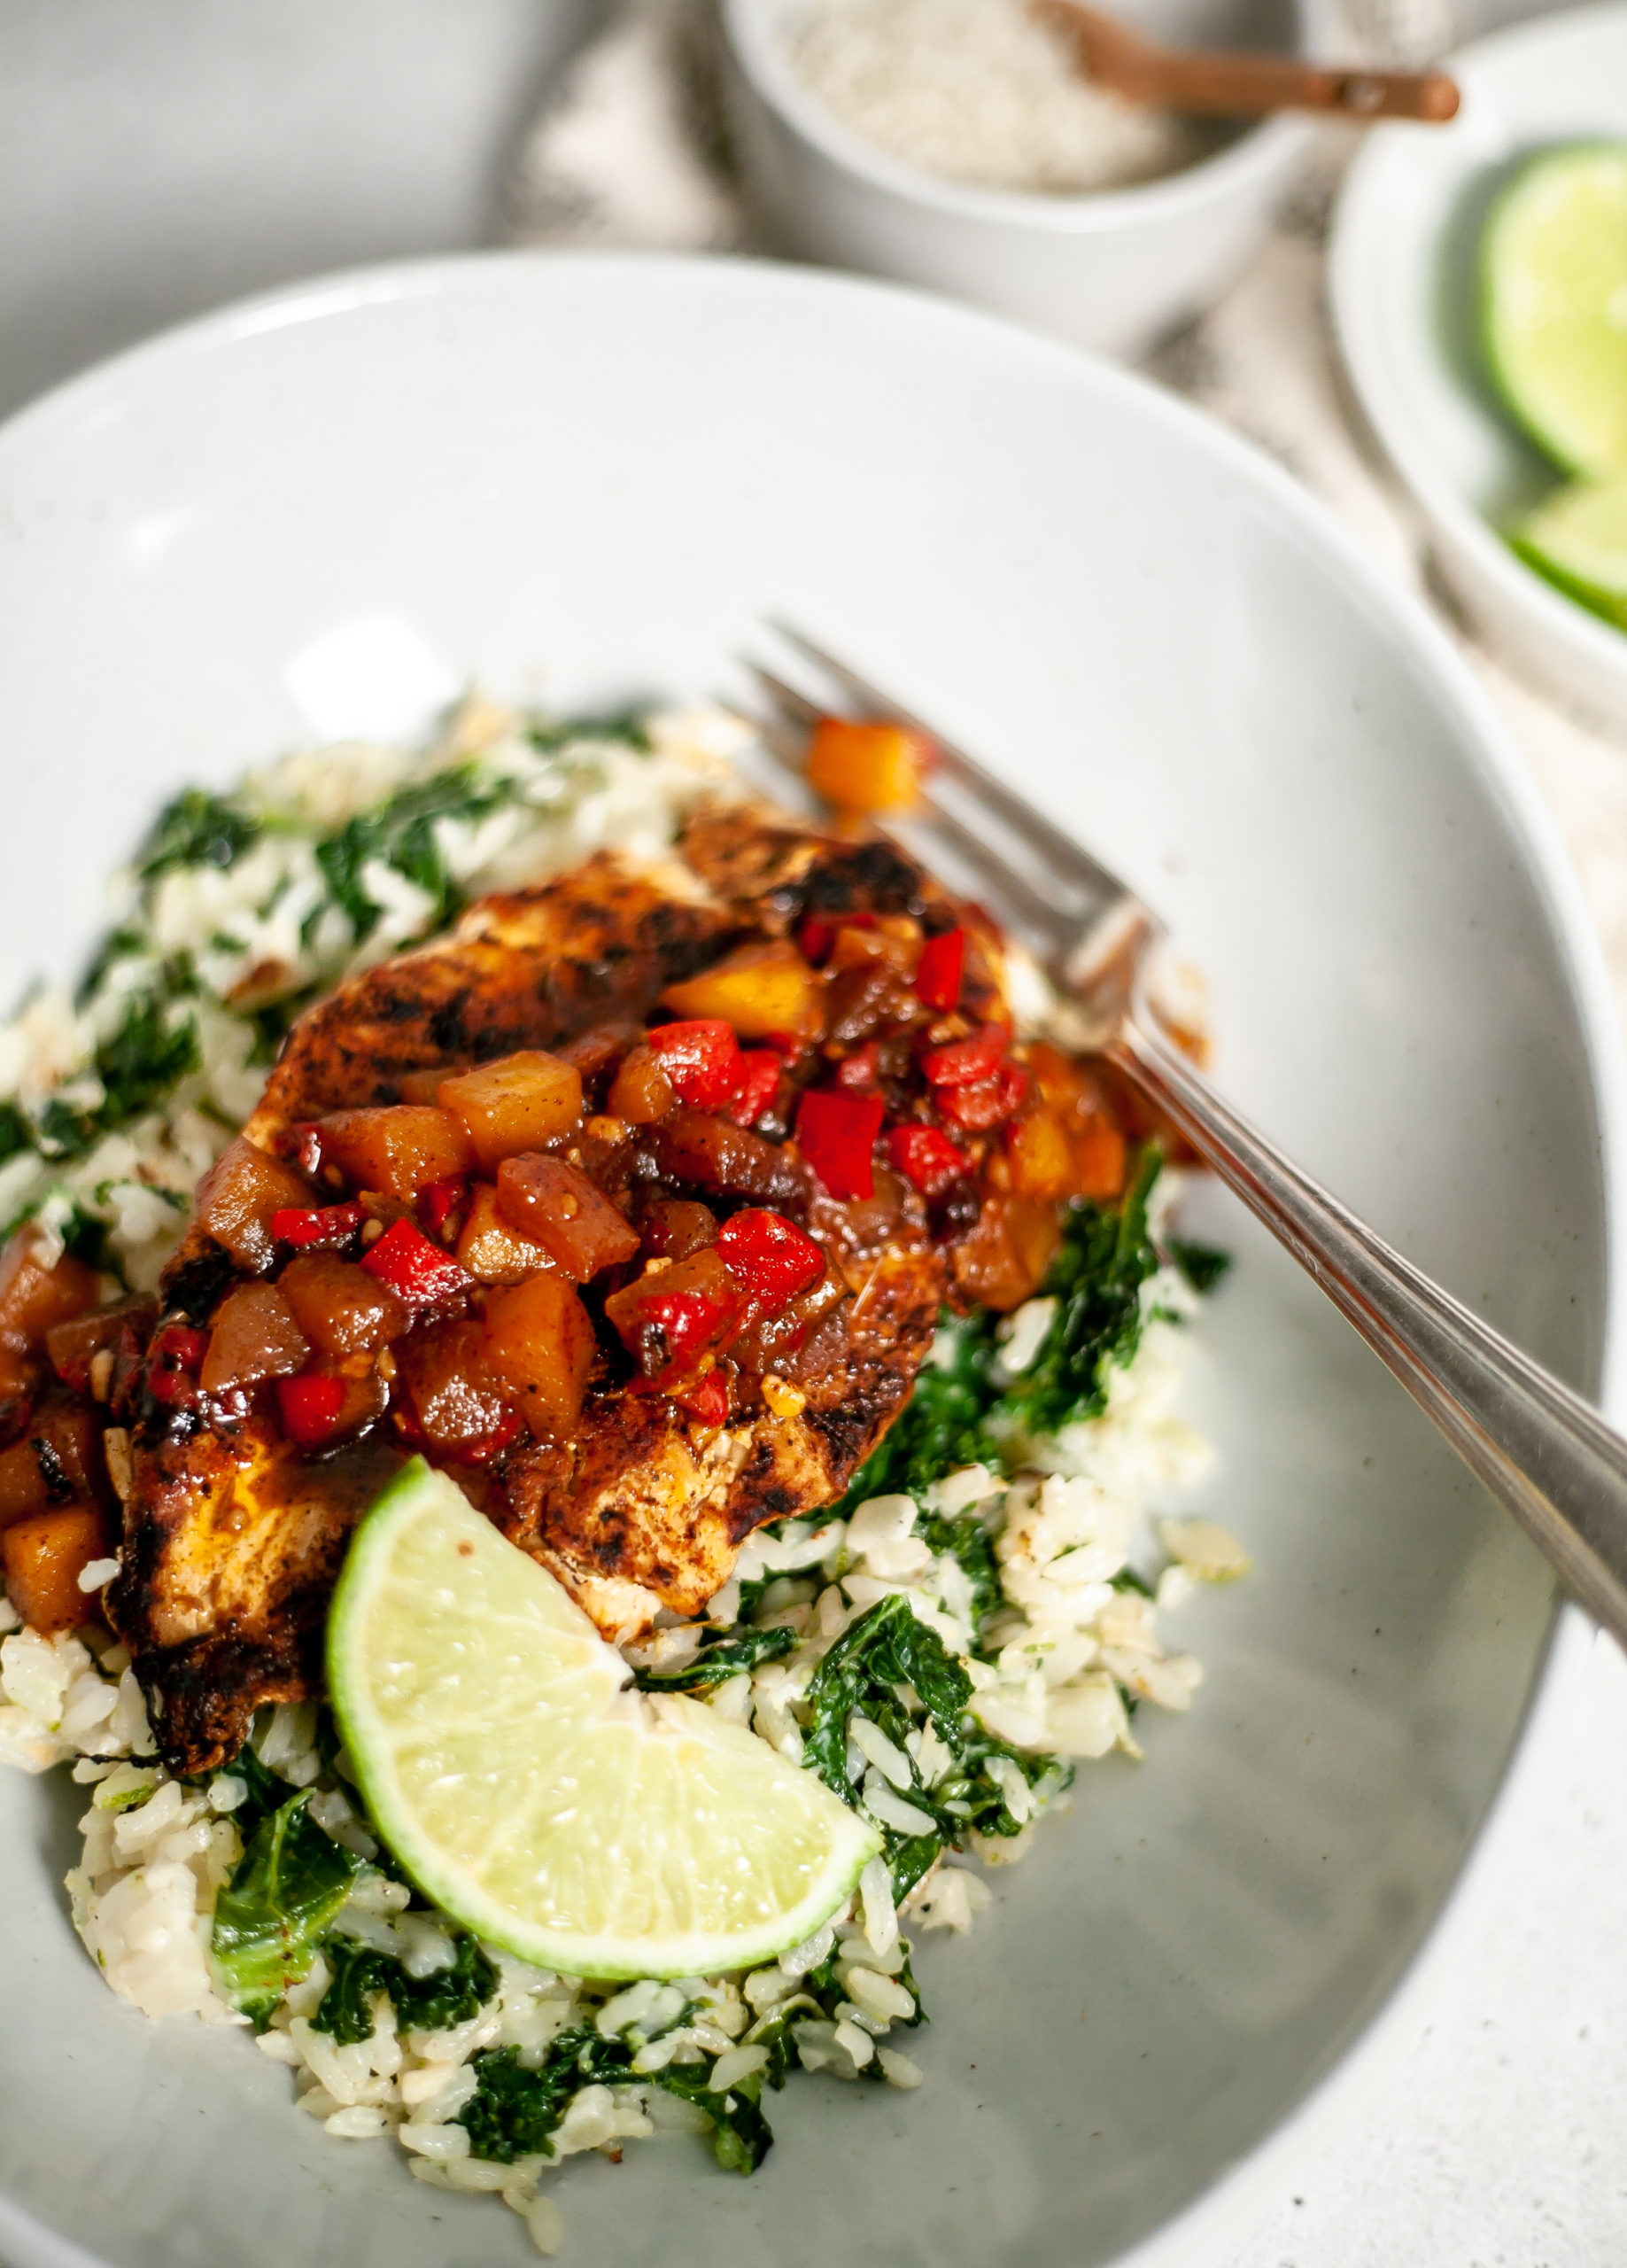 Mango Jerk Chicken with Coconut Kale Lime Rice Recipe